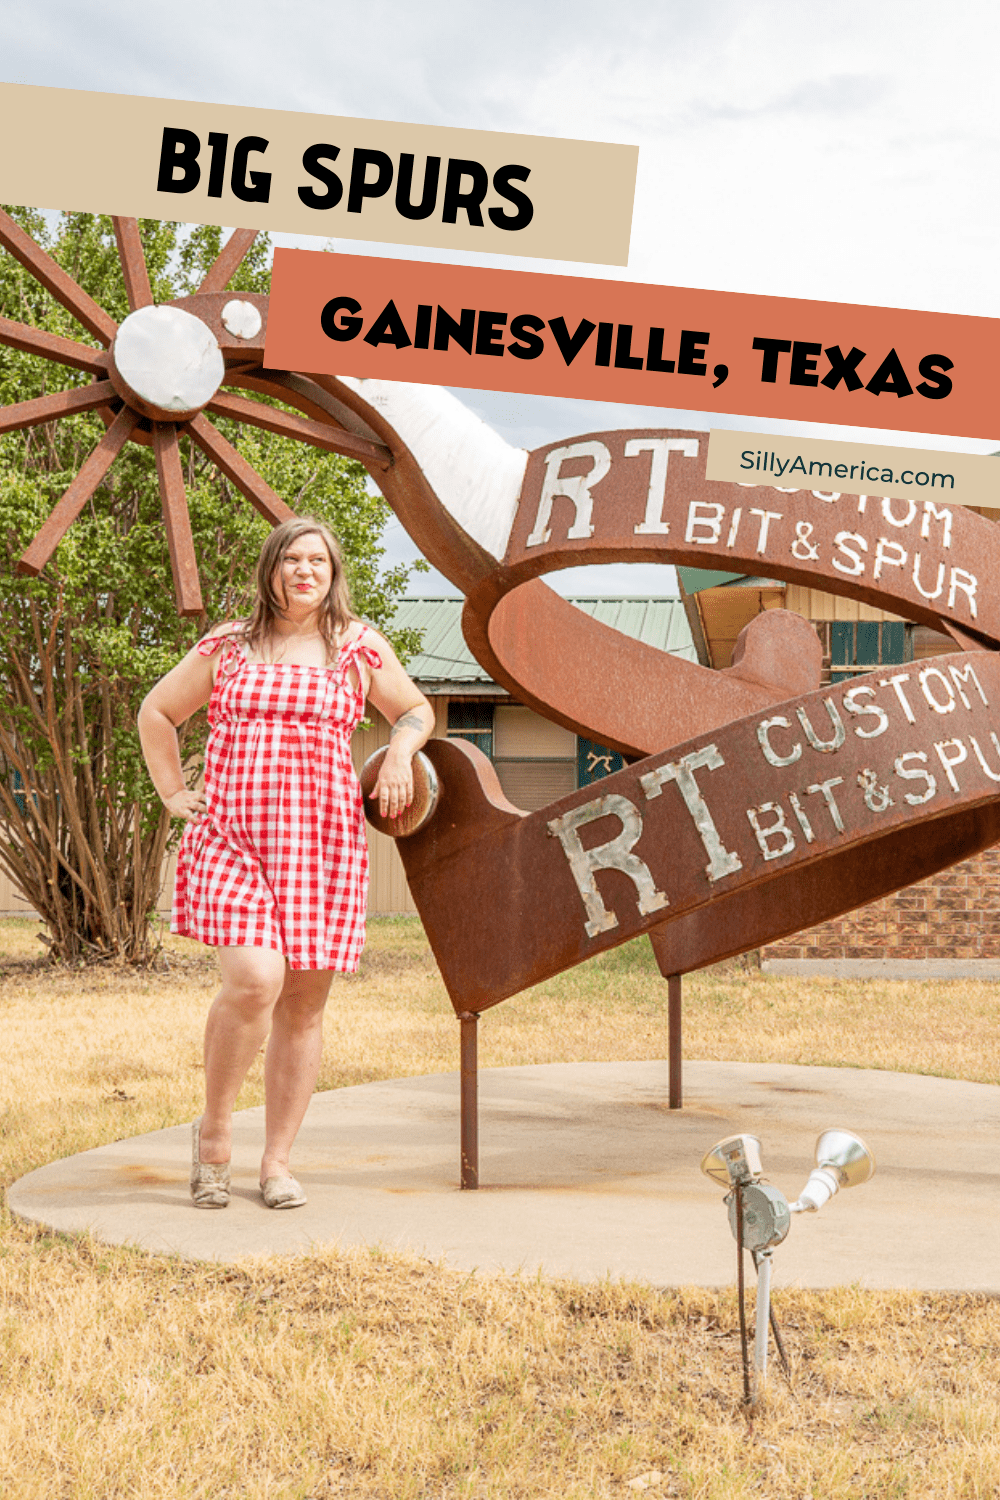 Take a SPUR of the moment day trip from Dallas and stop at this Texas roadside attraction: the Big Spurs in Gainesville, Texas. Located in a front yard, the big spurs advertise the business RT Custom Bit & Spur — and they actually spin! #Texas #TexasRoadTrip #RoadTripStop #RoadsideAttraction #RoadsideAttractions #TexasRoadsideAttraction